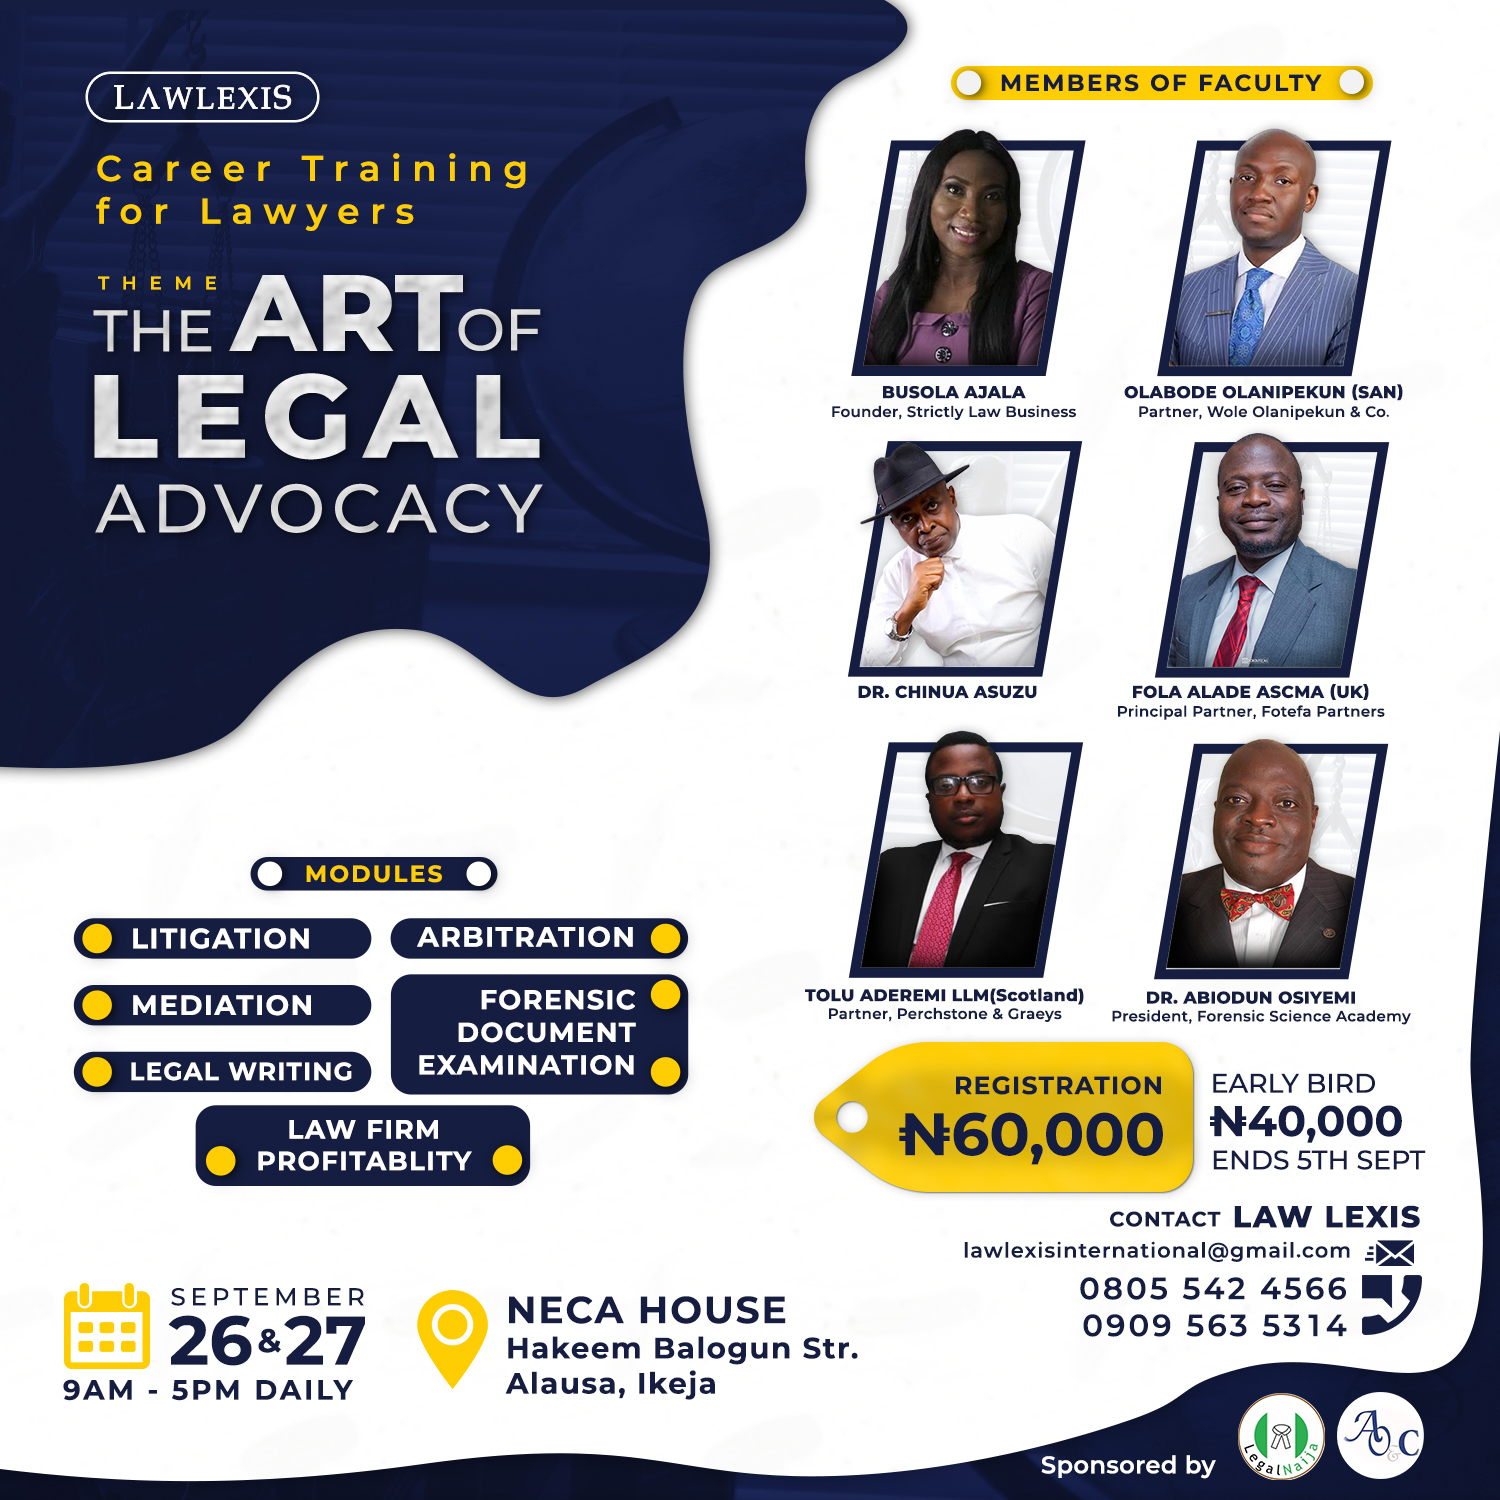 Register For Art of Legal Advocacy And Law Firm Profitability Training For Lawyers